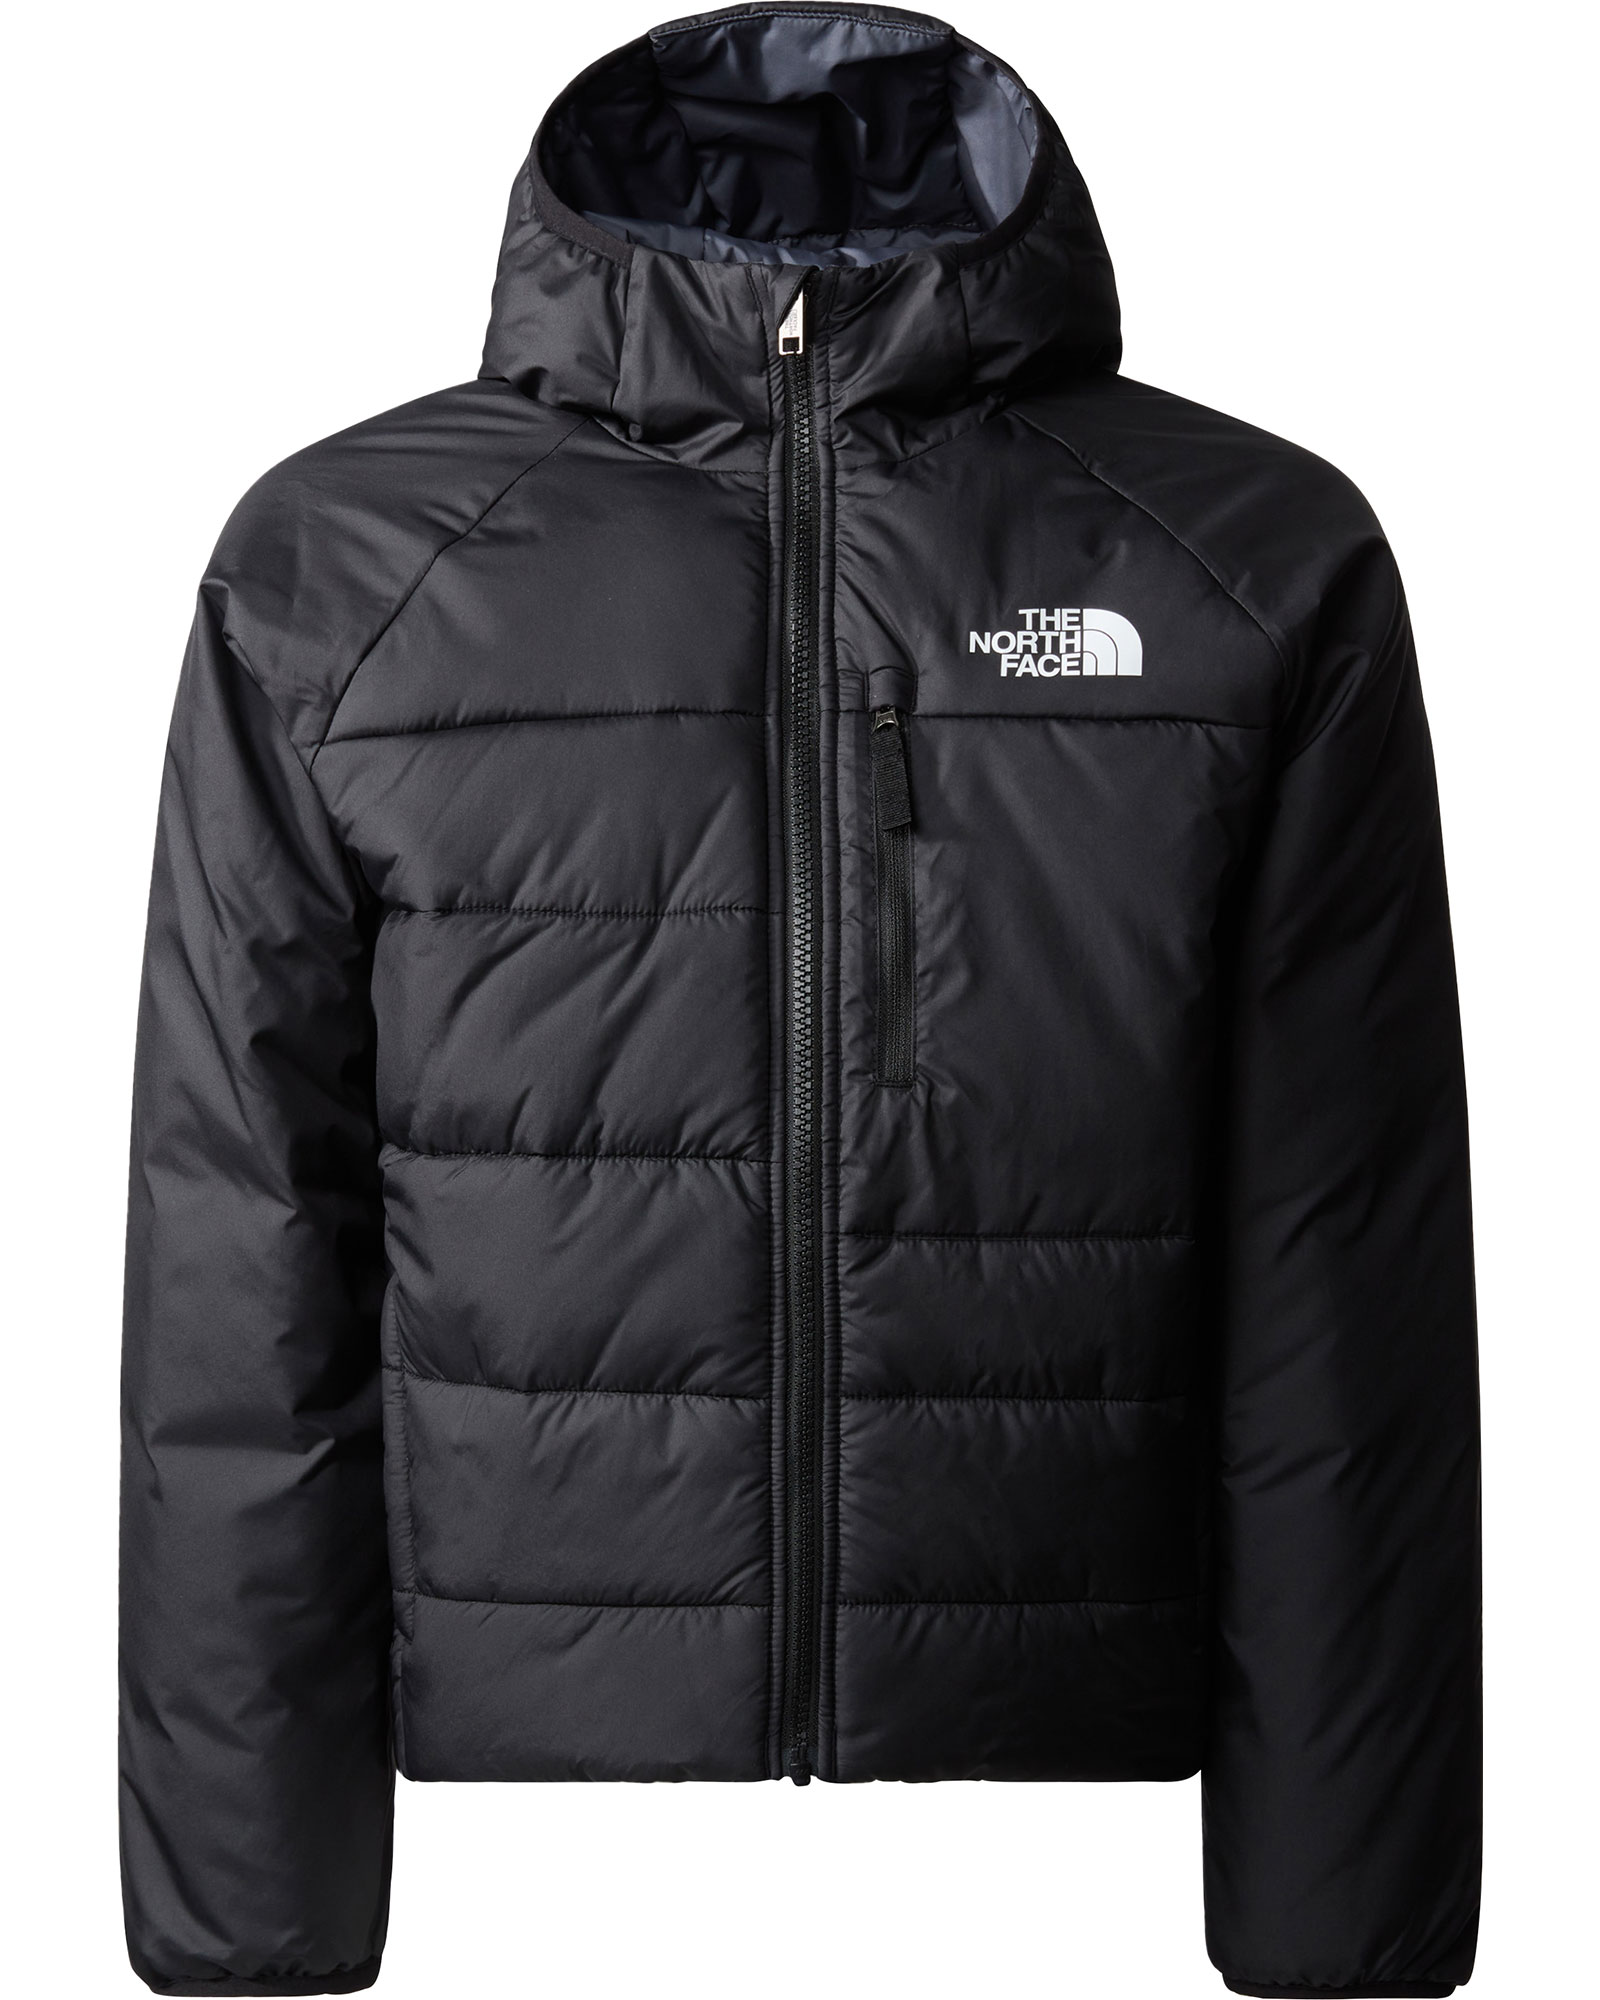 The North Face Boy’s Reversible Perrito Insulated Jacket - TNF Black M